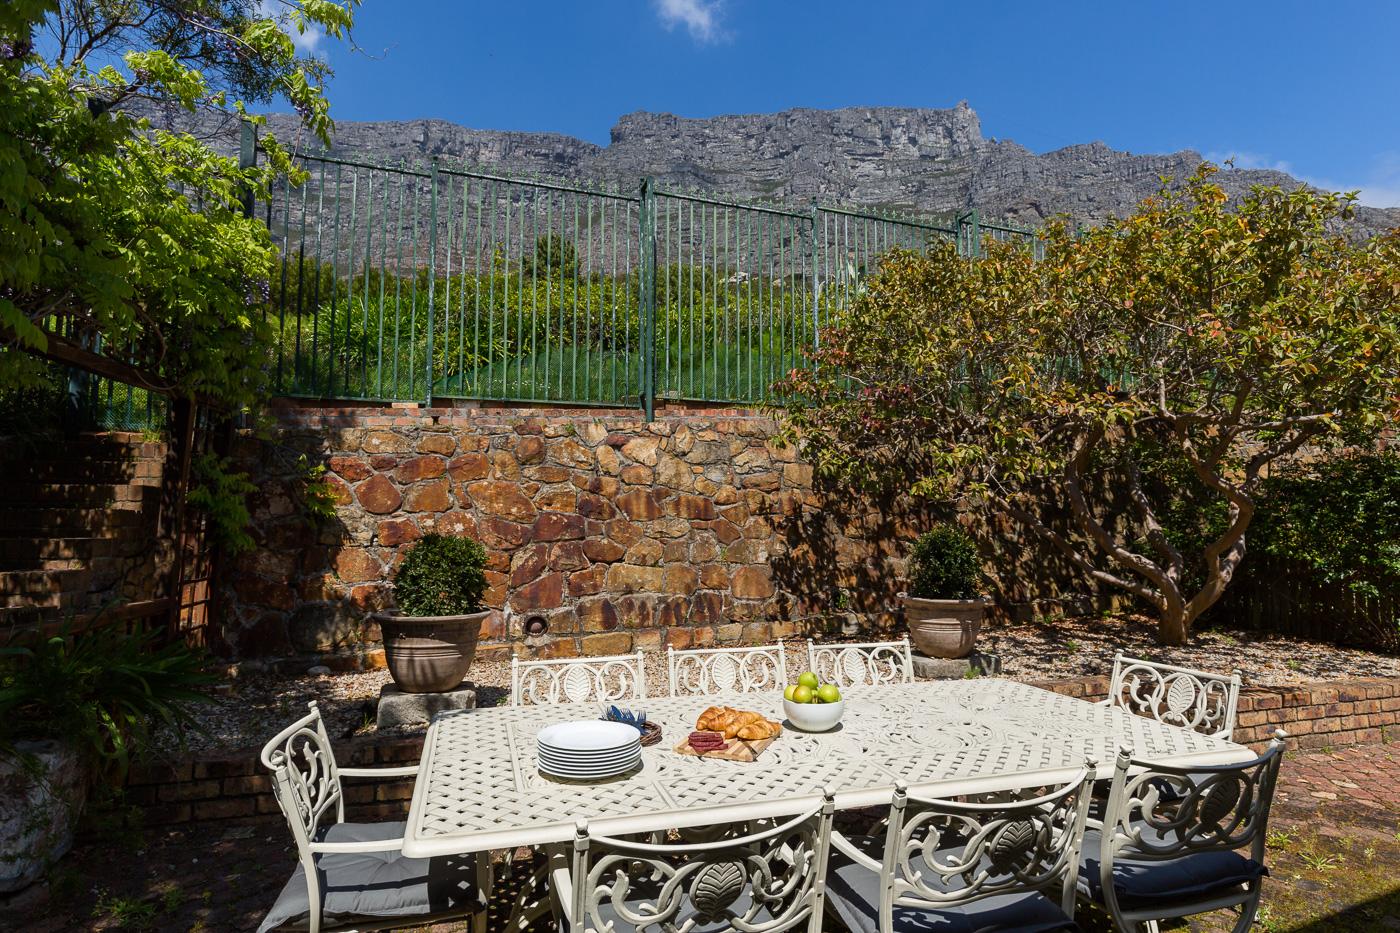 Photo 10 of Bella Montagna accommodation in Oranjezicht, Cape Town with 4 bedrooms and 2 bathrooms